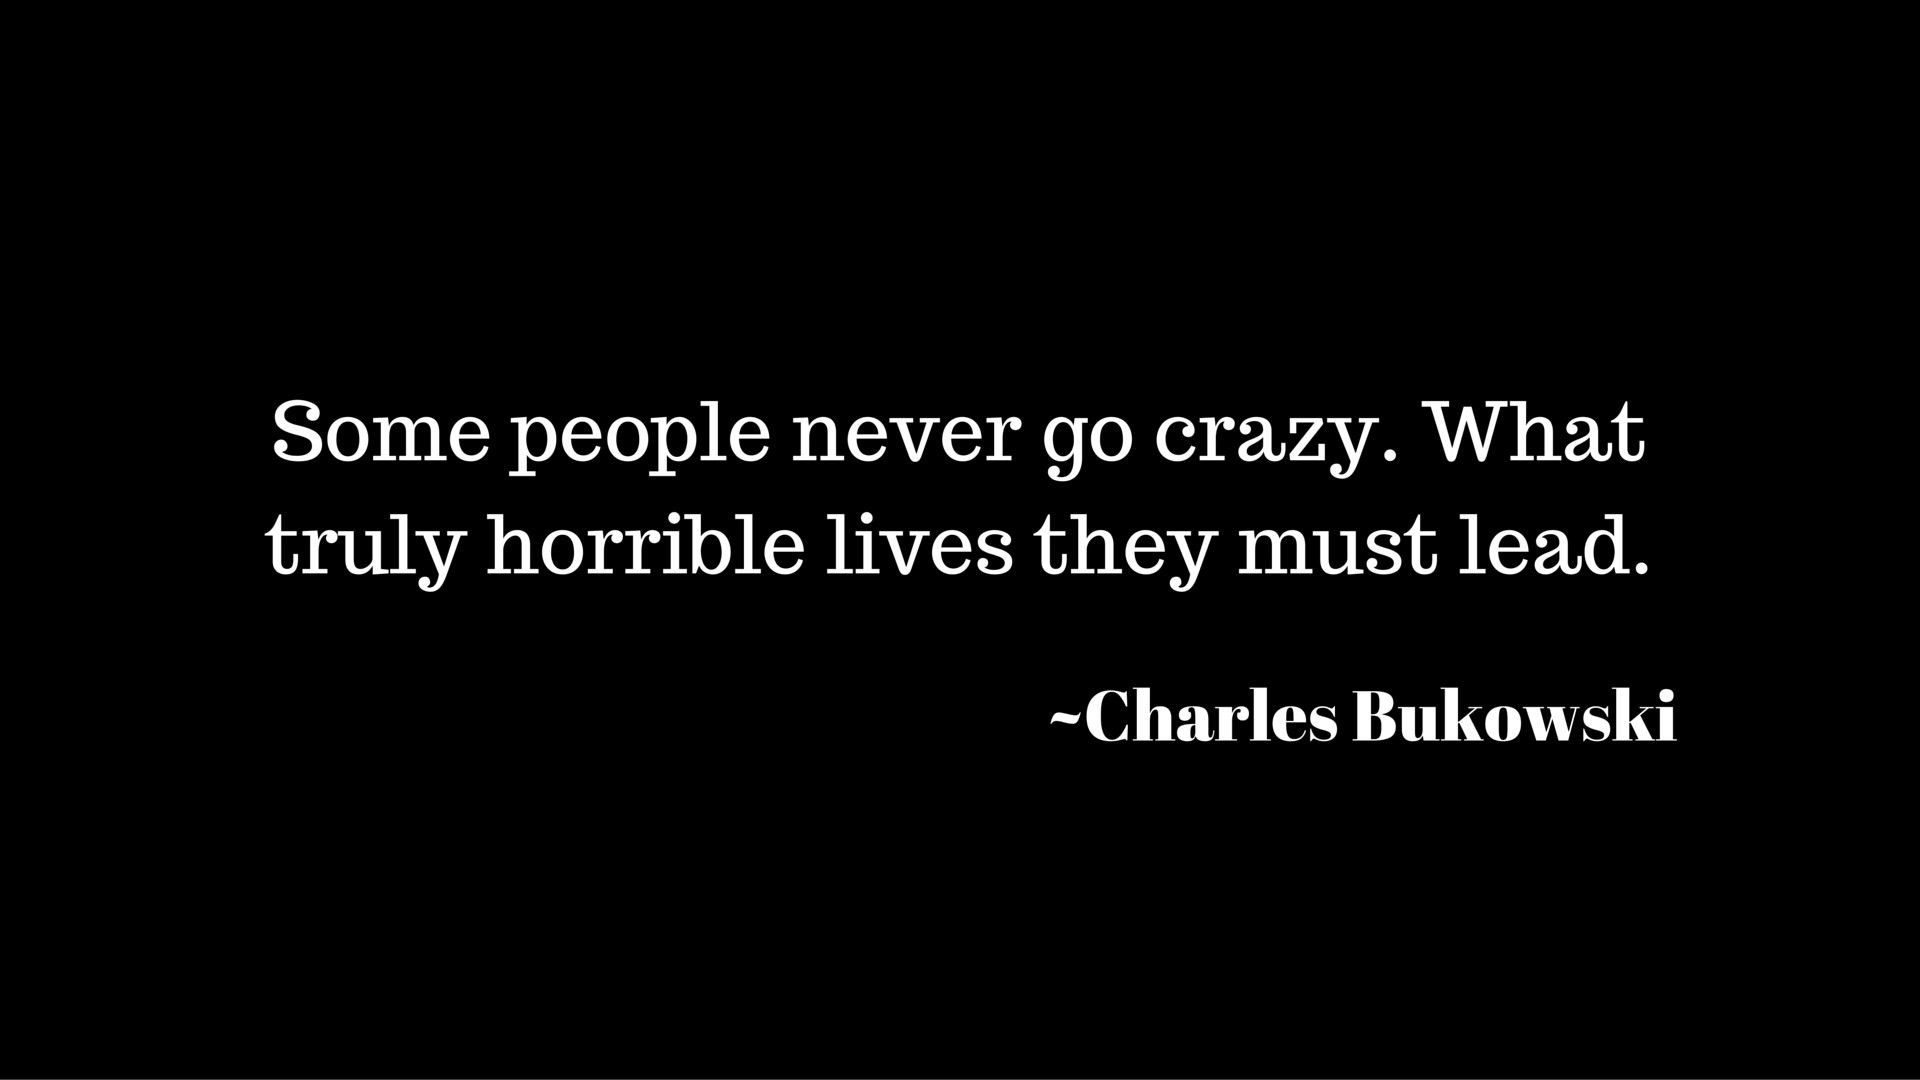 Charles Bukowski, Quote Wallpaper HD / Desktop and Mobile Background